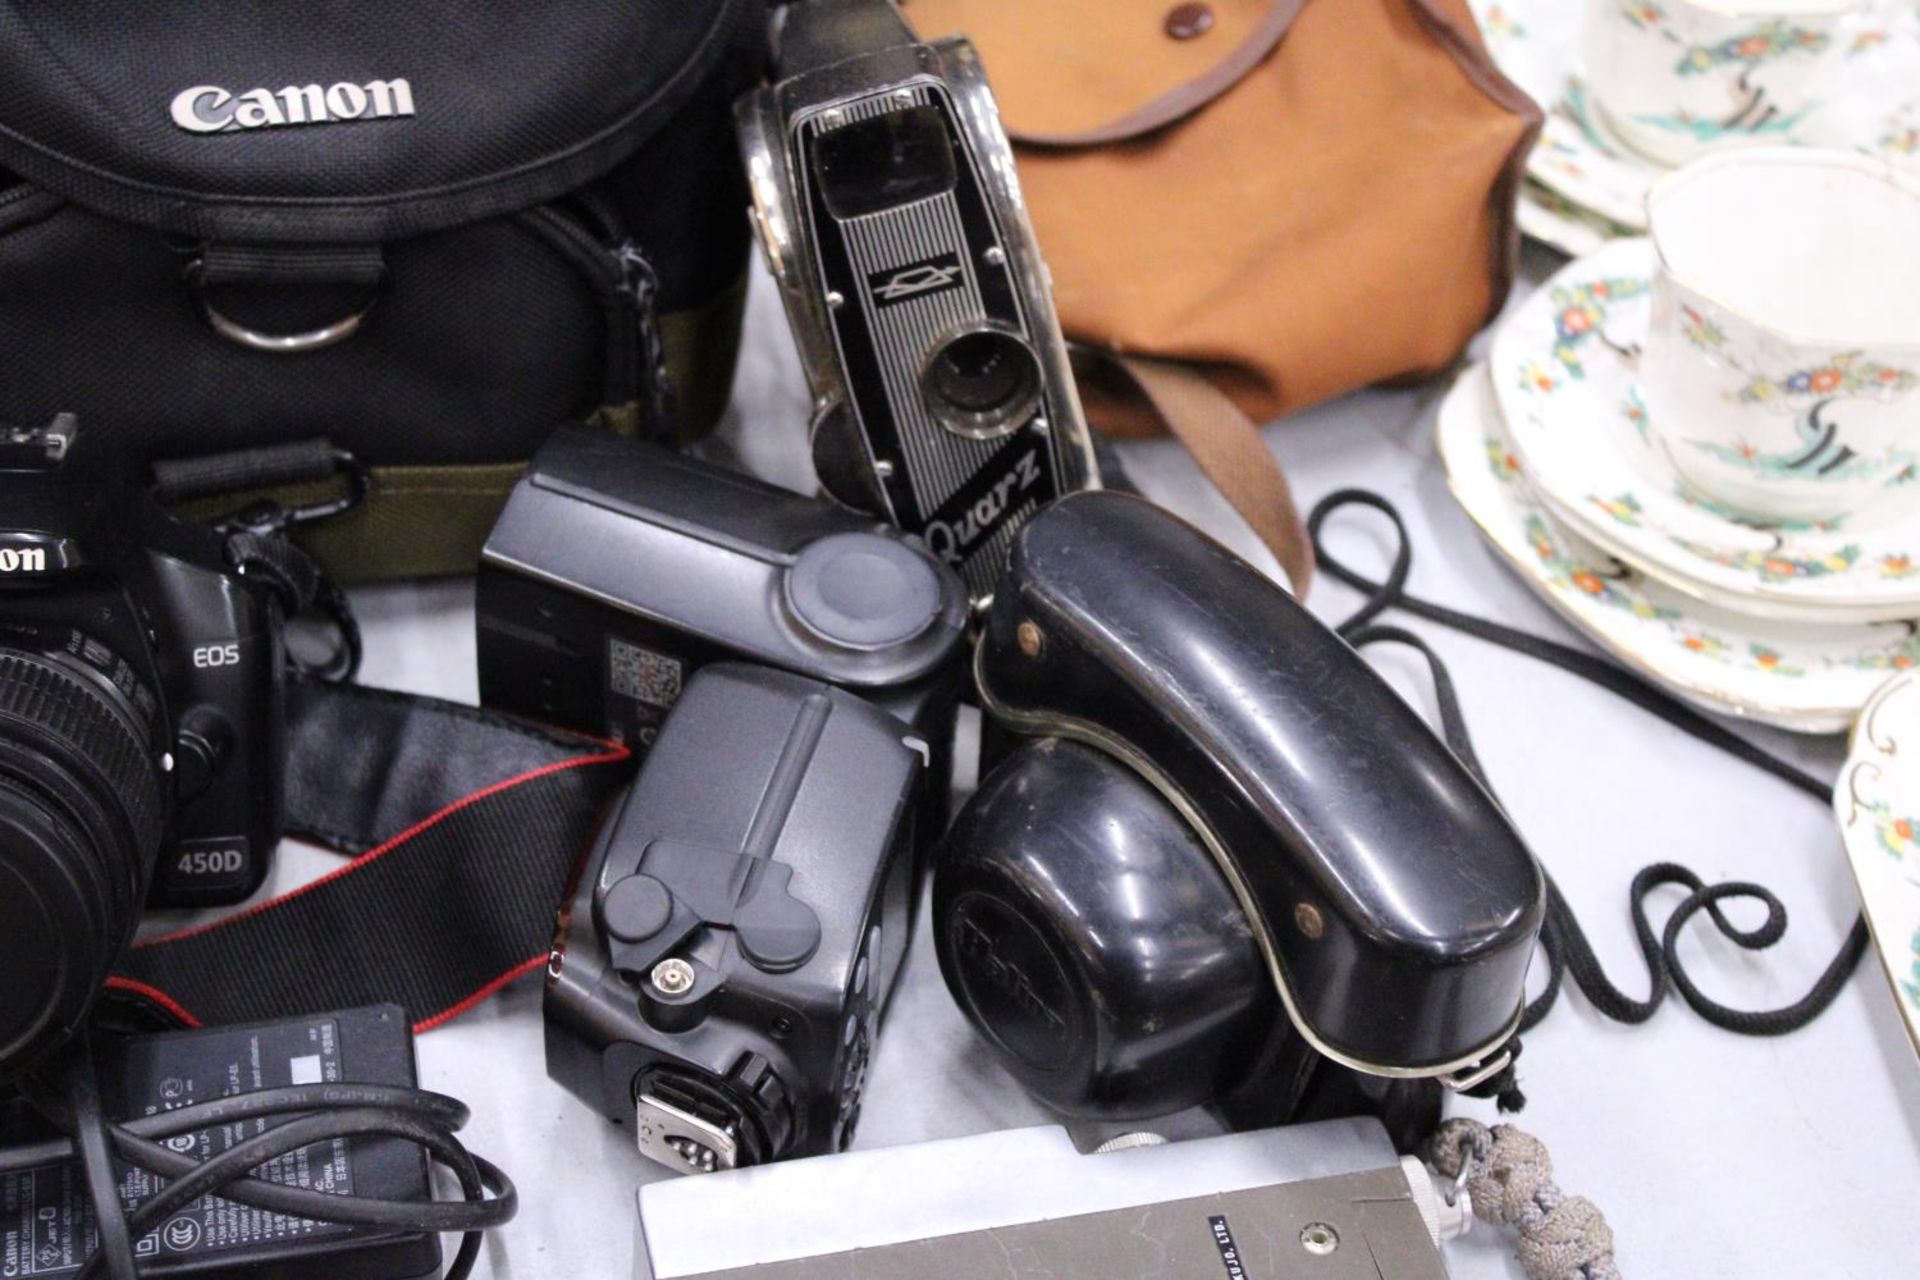 A COLLECTION OF CAMERAS TO INCLUDE A CANON EOS WITH BATTERY PACK, LENS AND BAG, PLUS A VINTAGE - Image 5 of 6